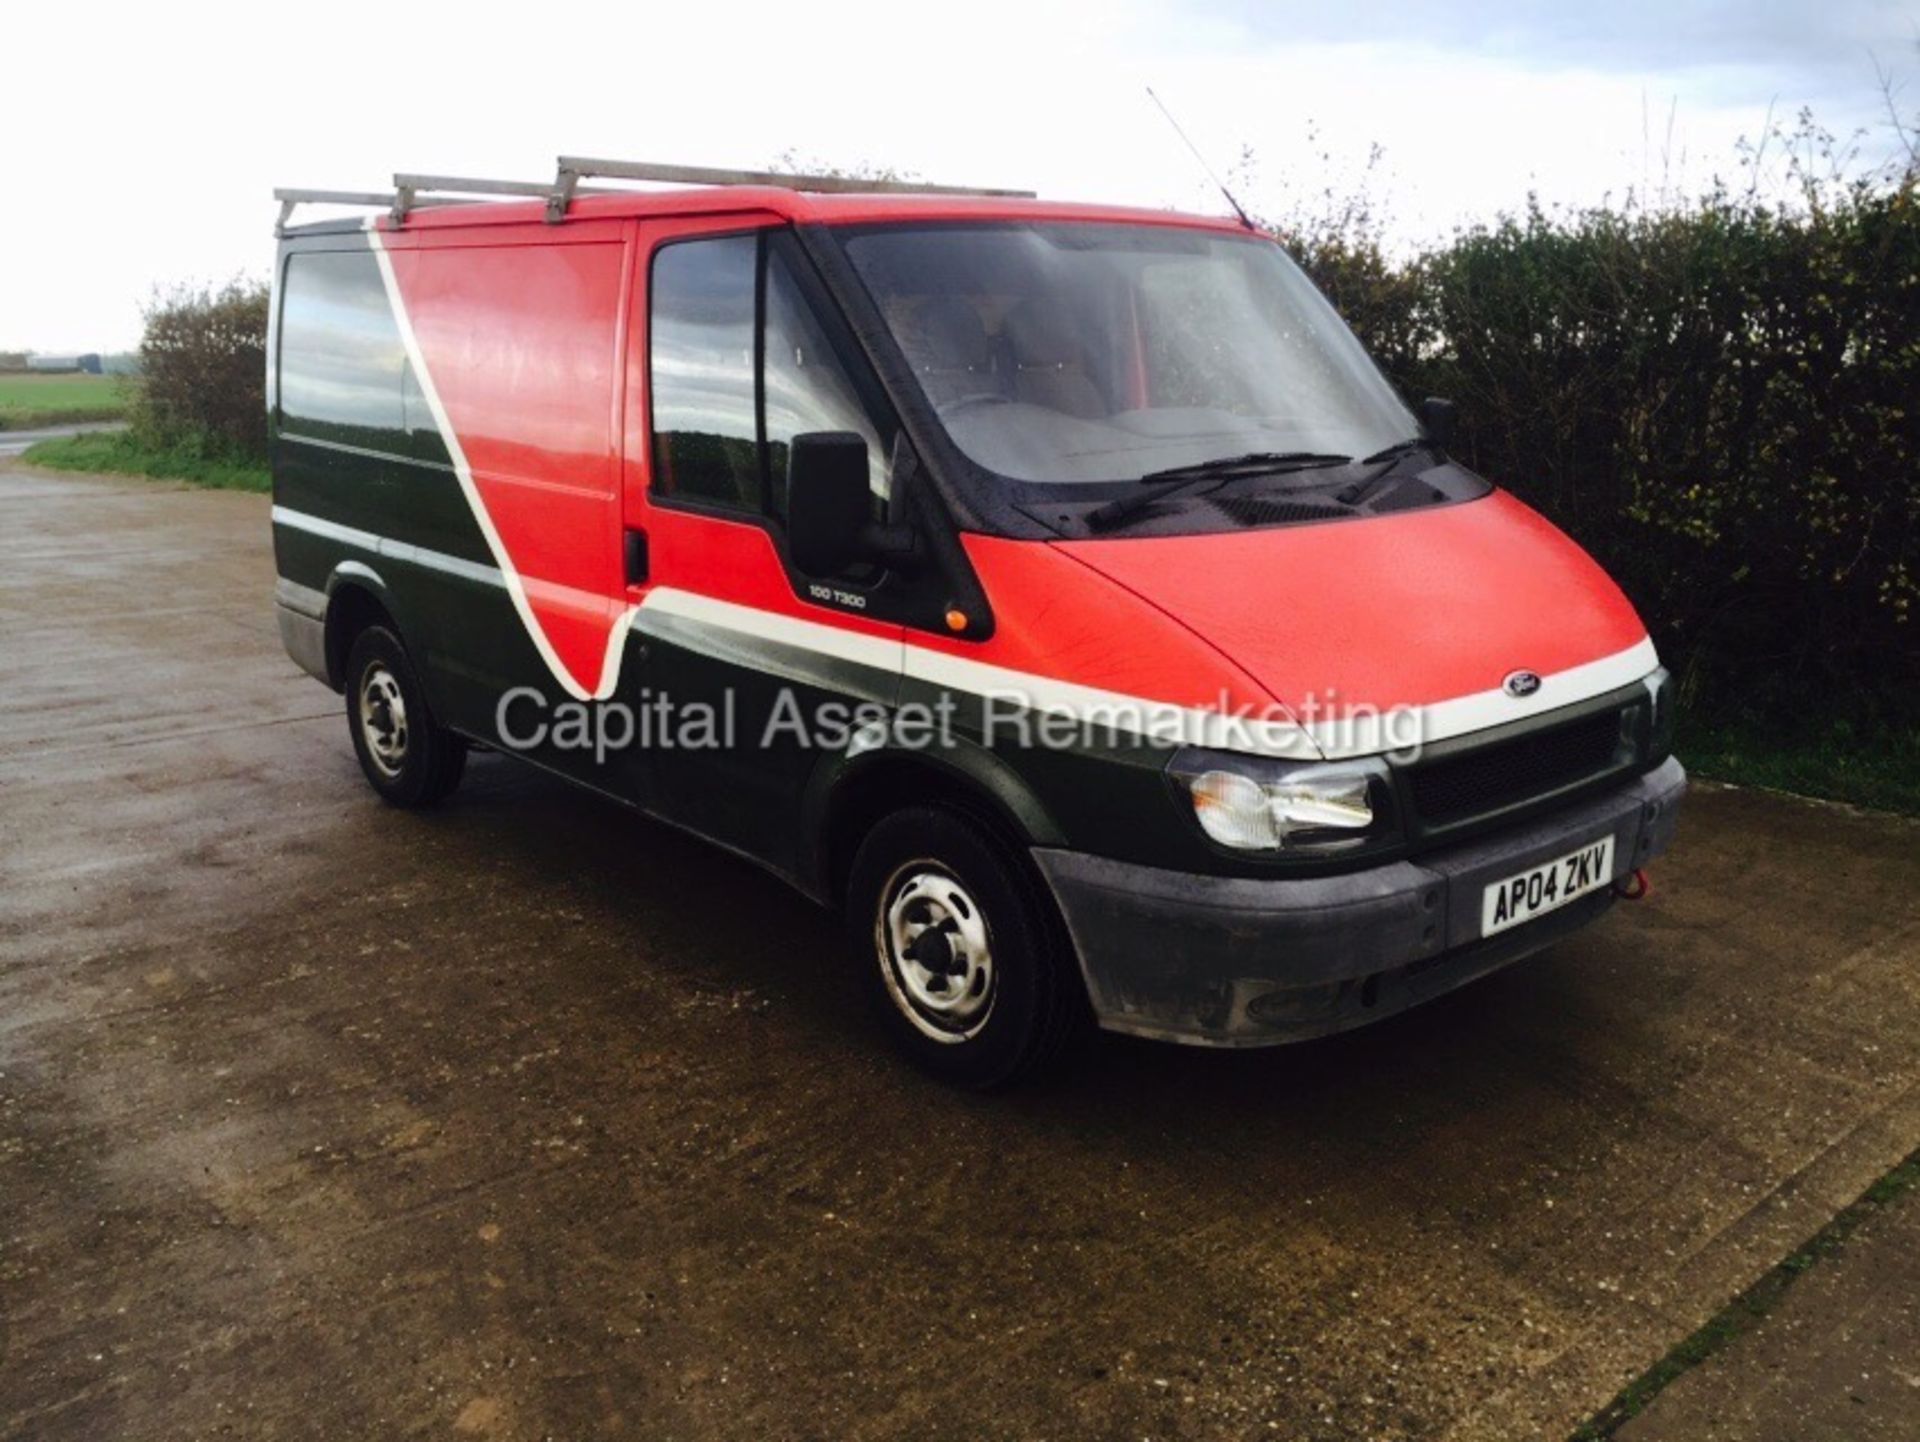 FORD TRANSIT 100 T300 (2004 - 04 REG) 2.0 DIESEL '100 PS'  (ULTRA LOW MILES)
NO VAT TO (SAVE 20%)